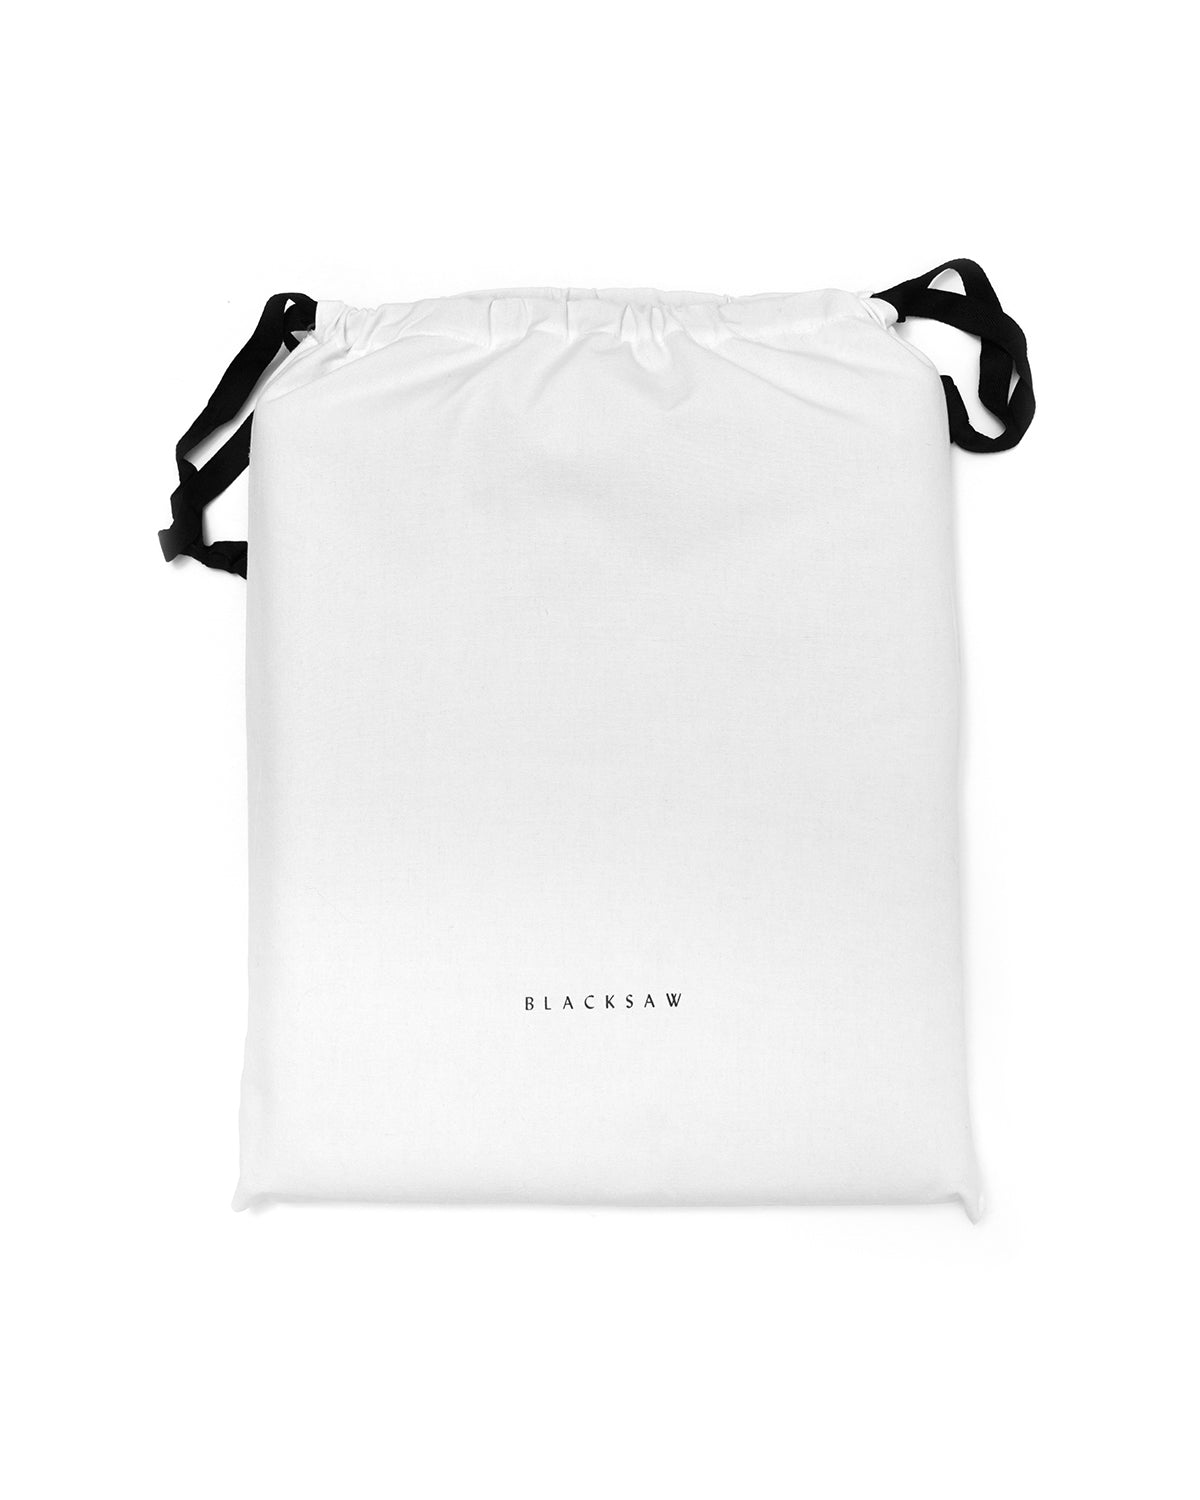 White dustbag with black ribbon drawstring included